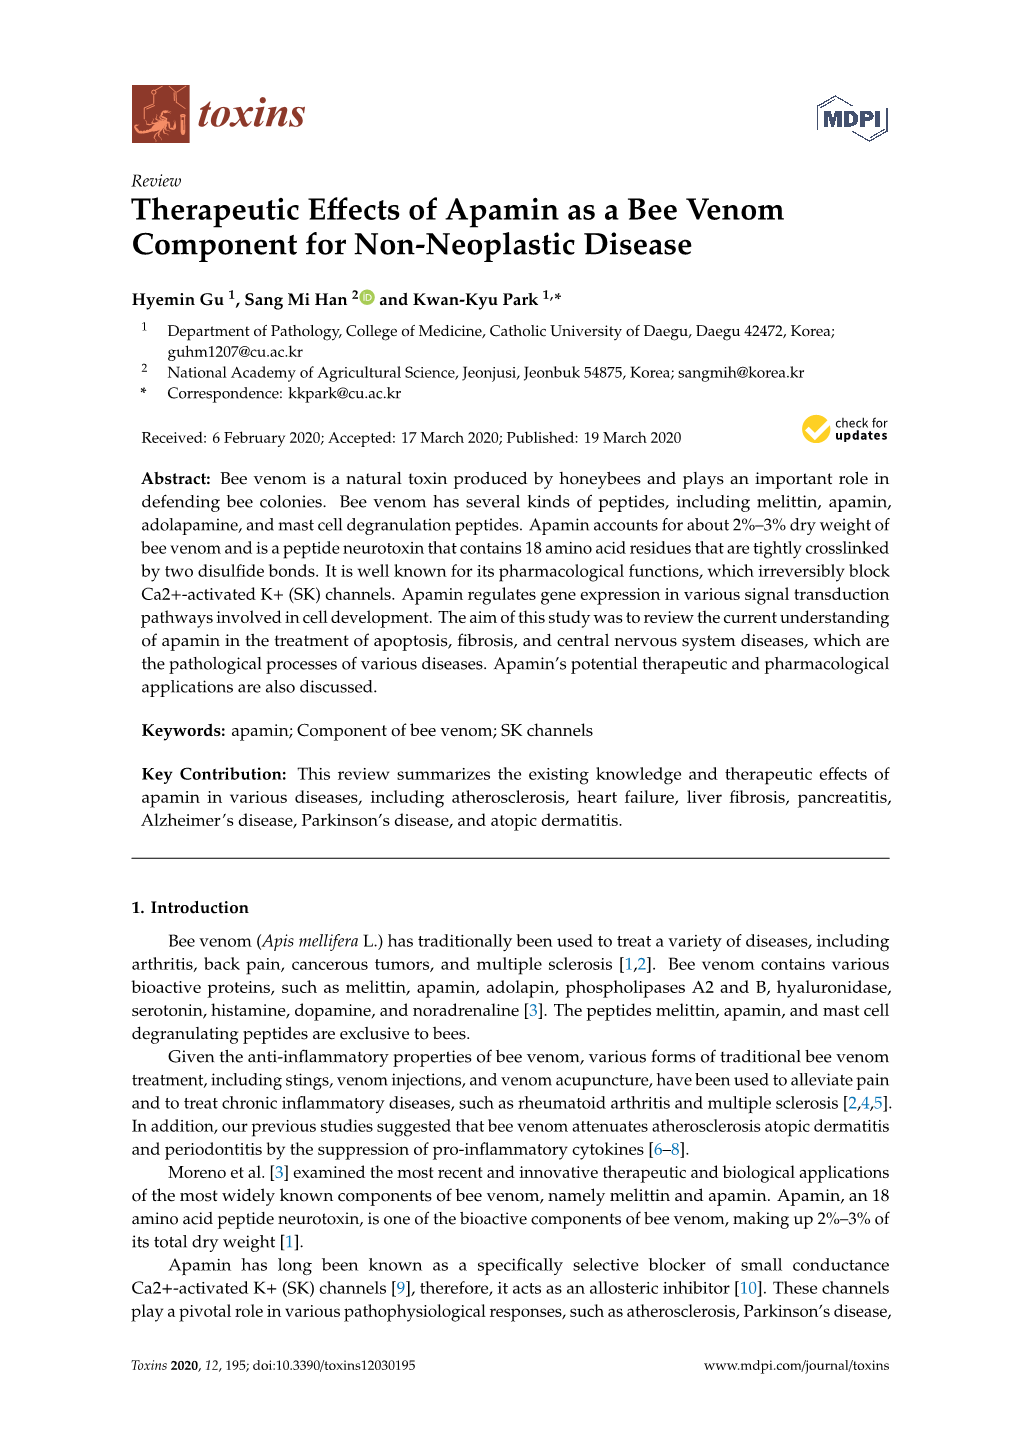 Therapeutic Effects of Apamin As a Bee Venom Component for Non